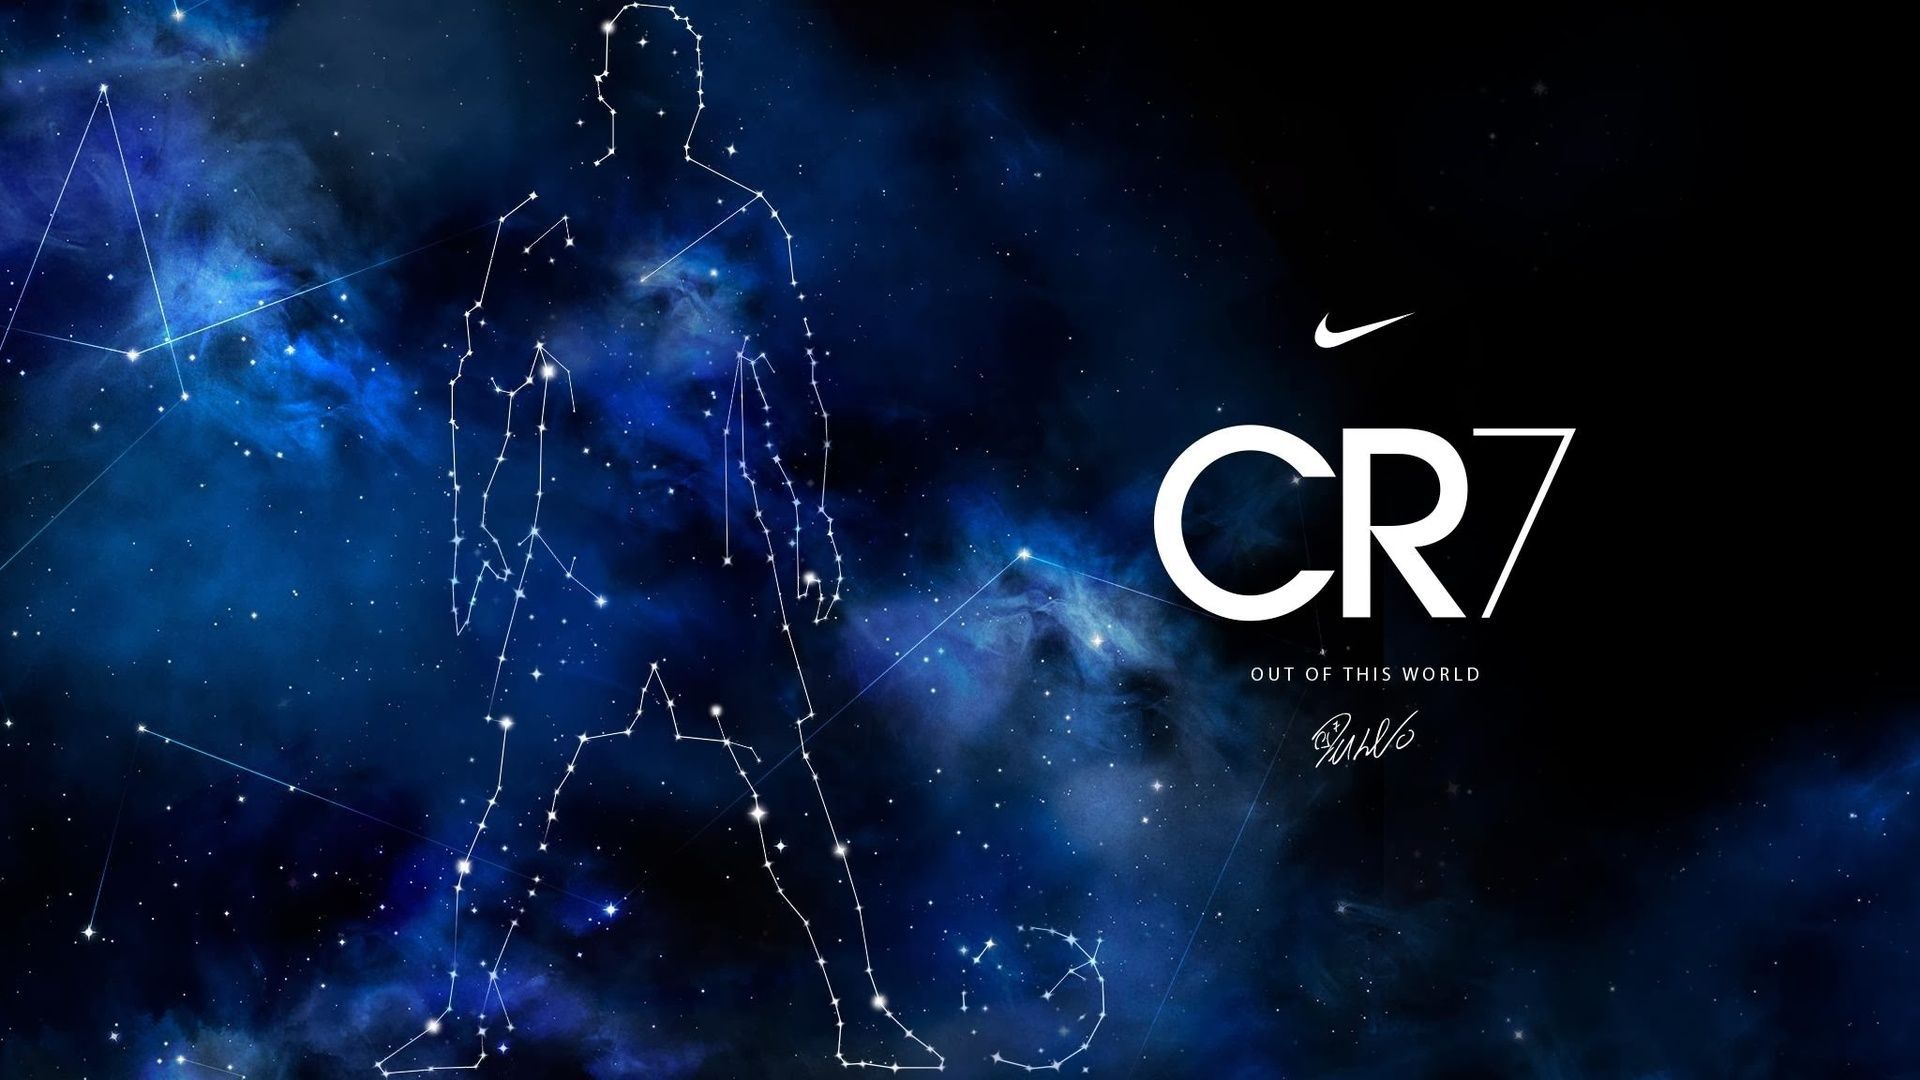 Free Download 35 Cr7 Logo Wallpapers Download At Wallpaperbro 19x1080 For Your Desktop Mobile Tablet Explore 27 Cr7 Out Of This World Wallpapers Cr7 Out Of This World Wallpapers